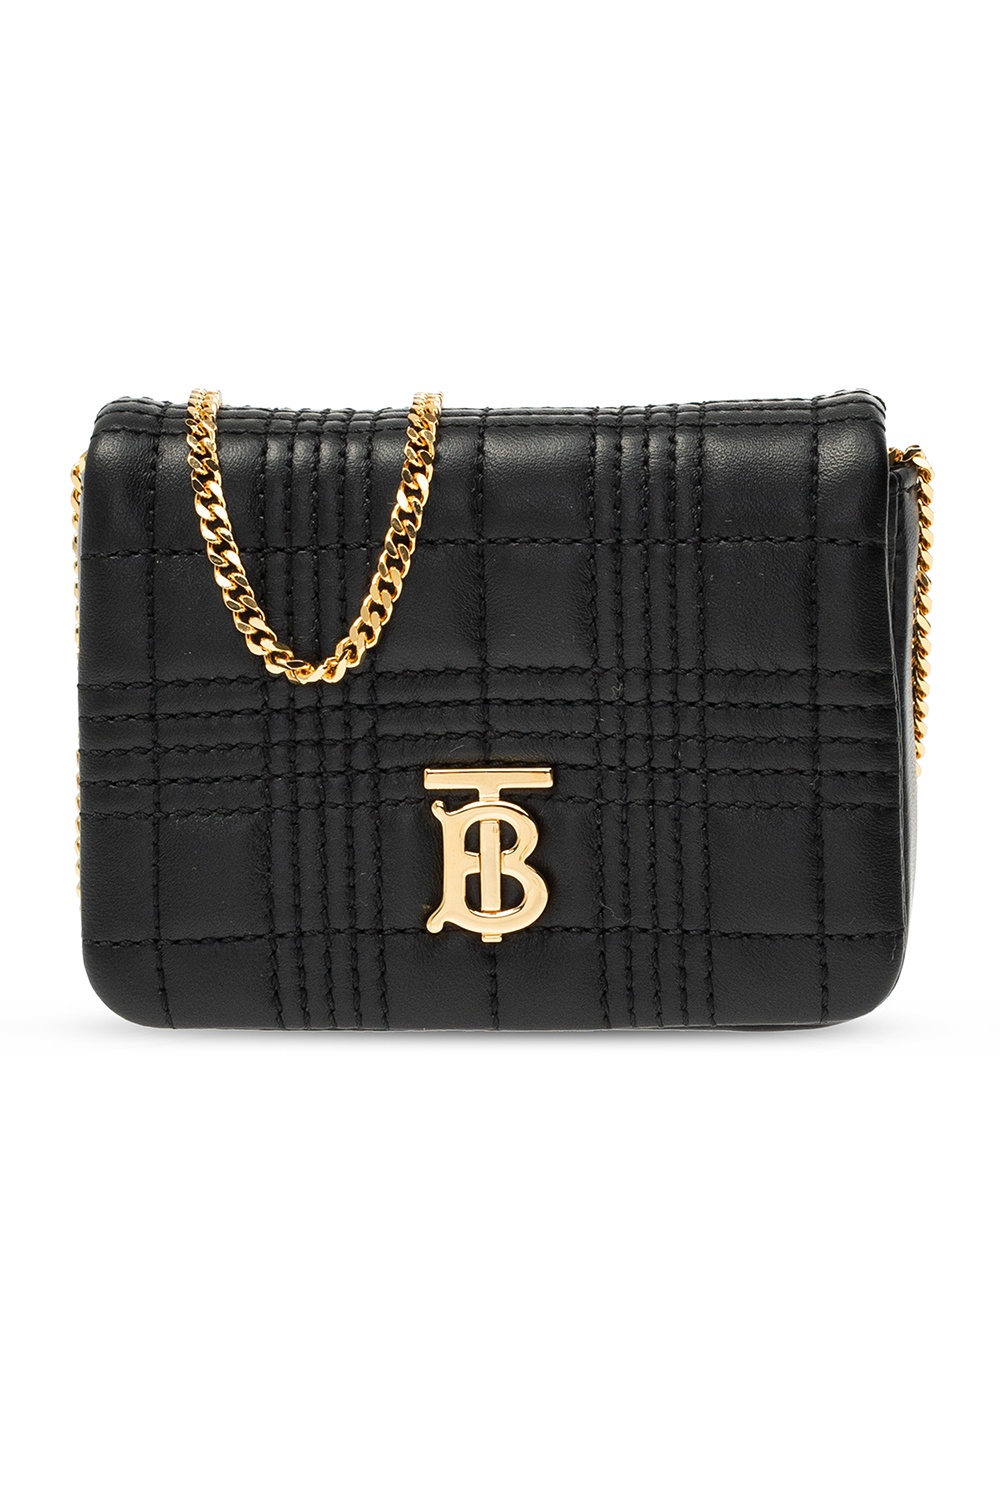 Burberry Ladies Black Quilted Leather Lola Wallet With Detachable